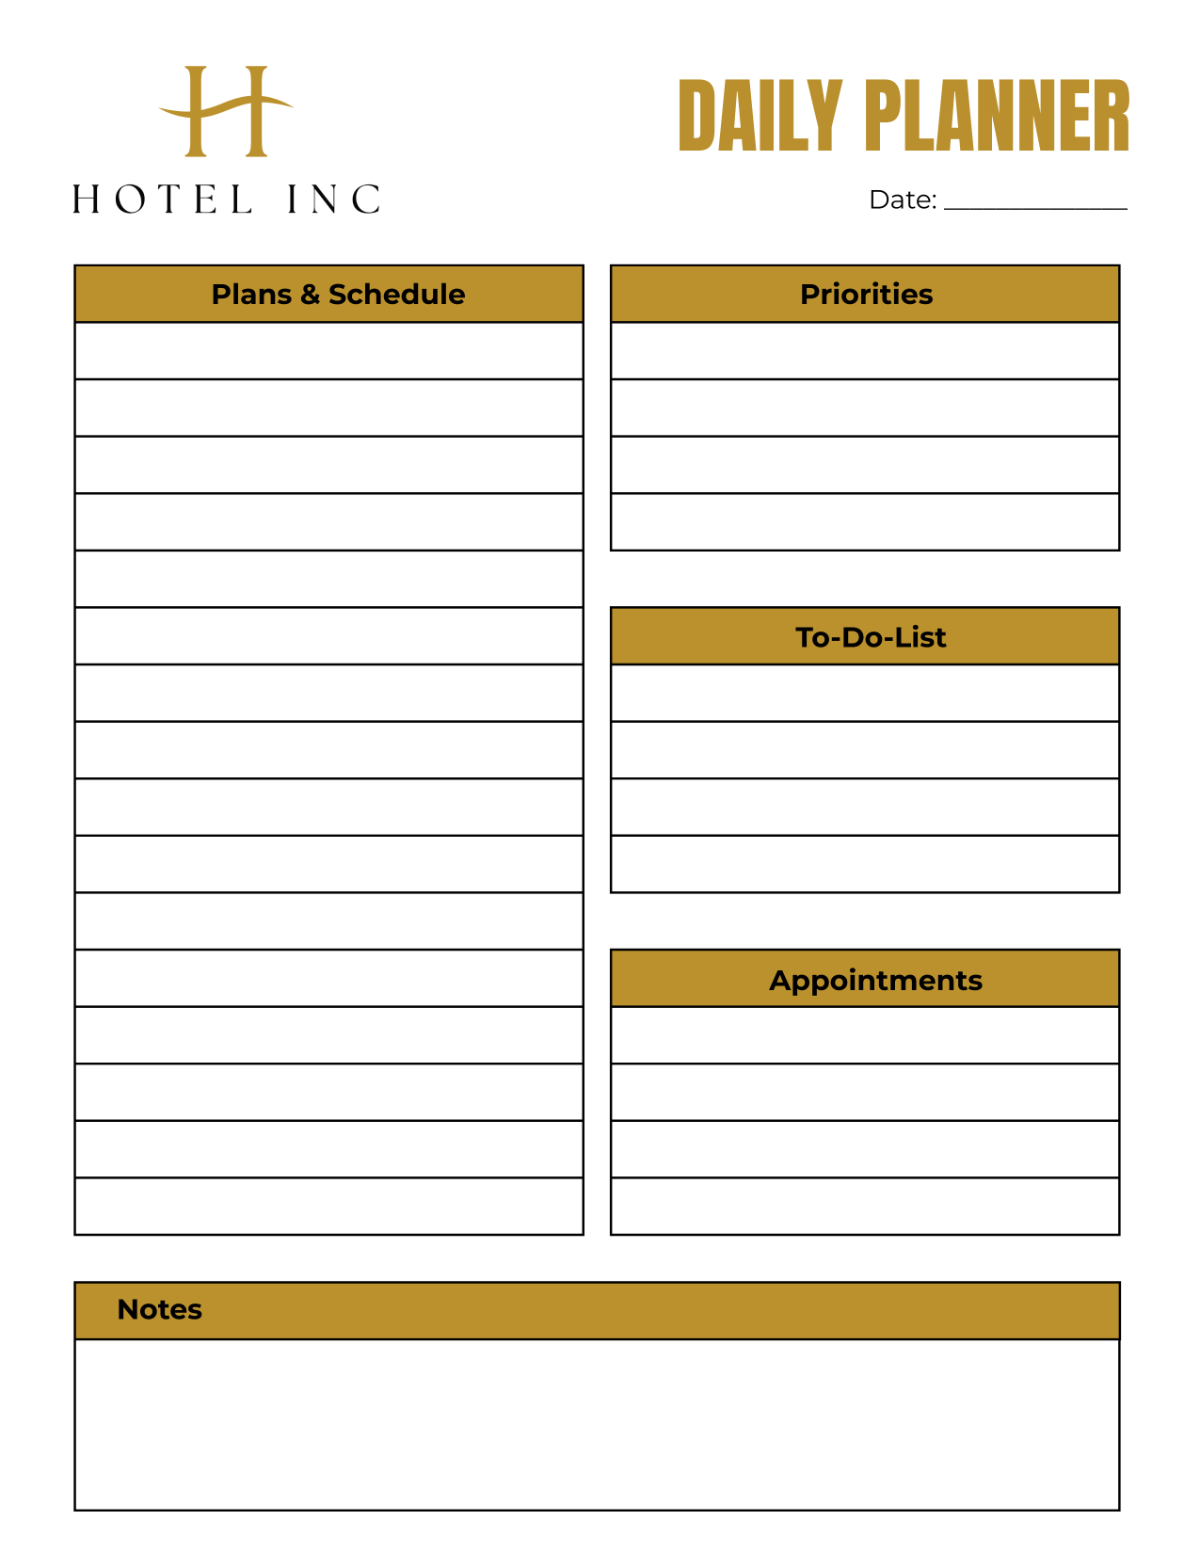 Hotel Daily Planner